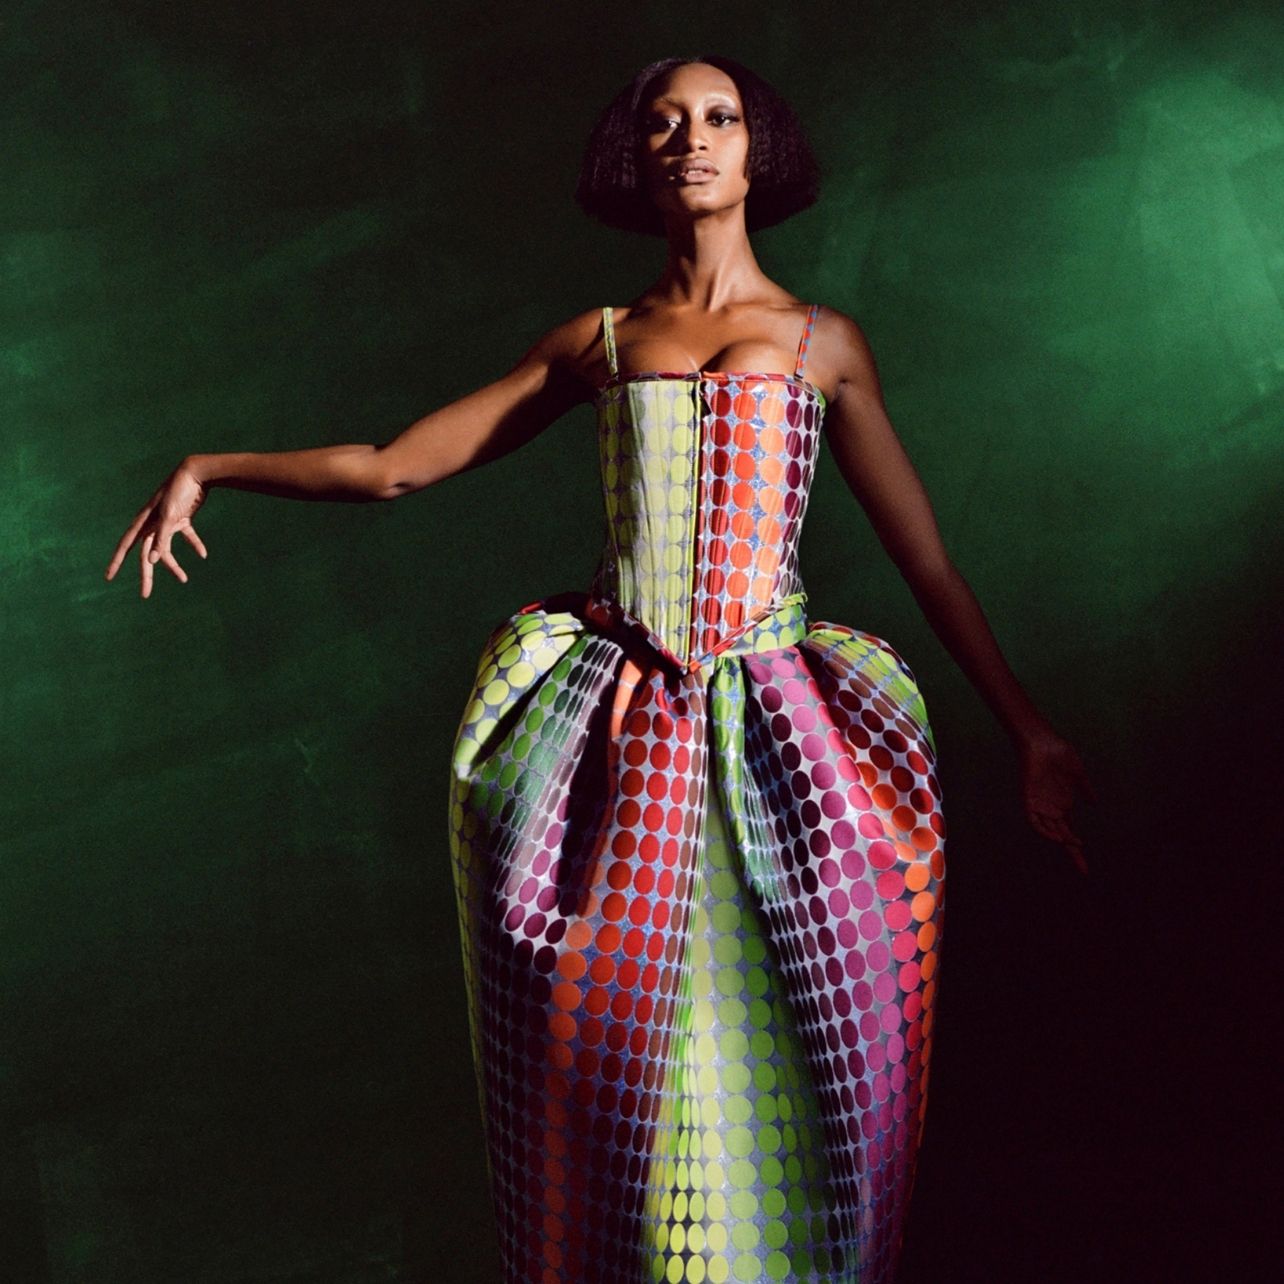 Woman poses wearing a structured dress with a multicolored dot pattern